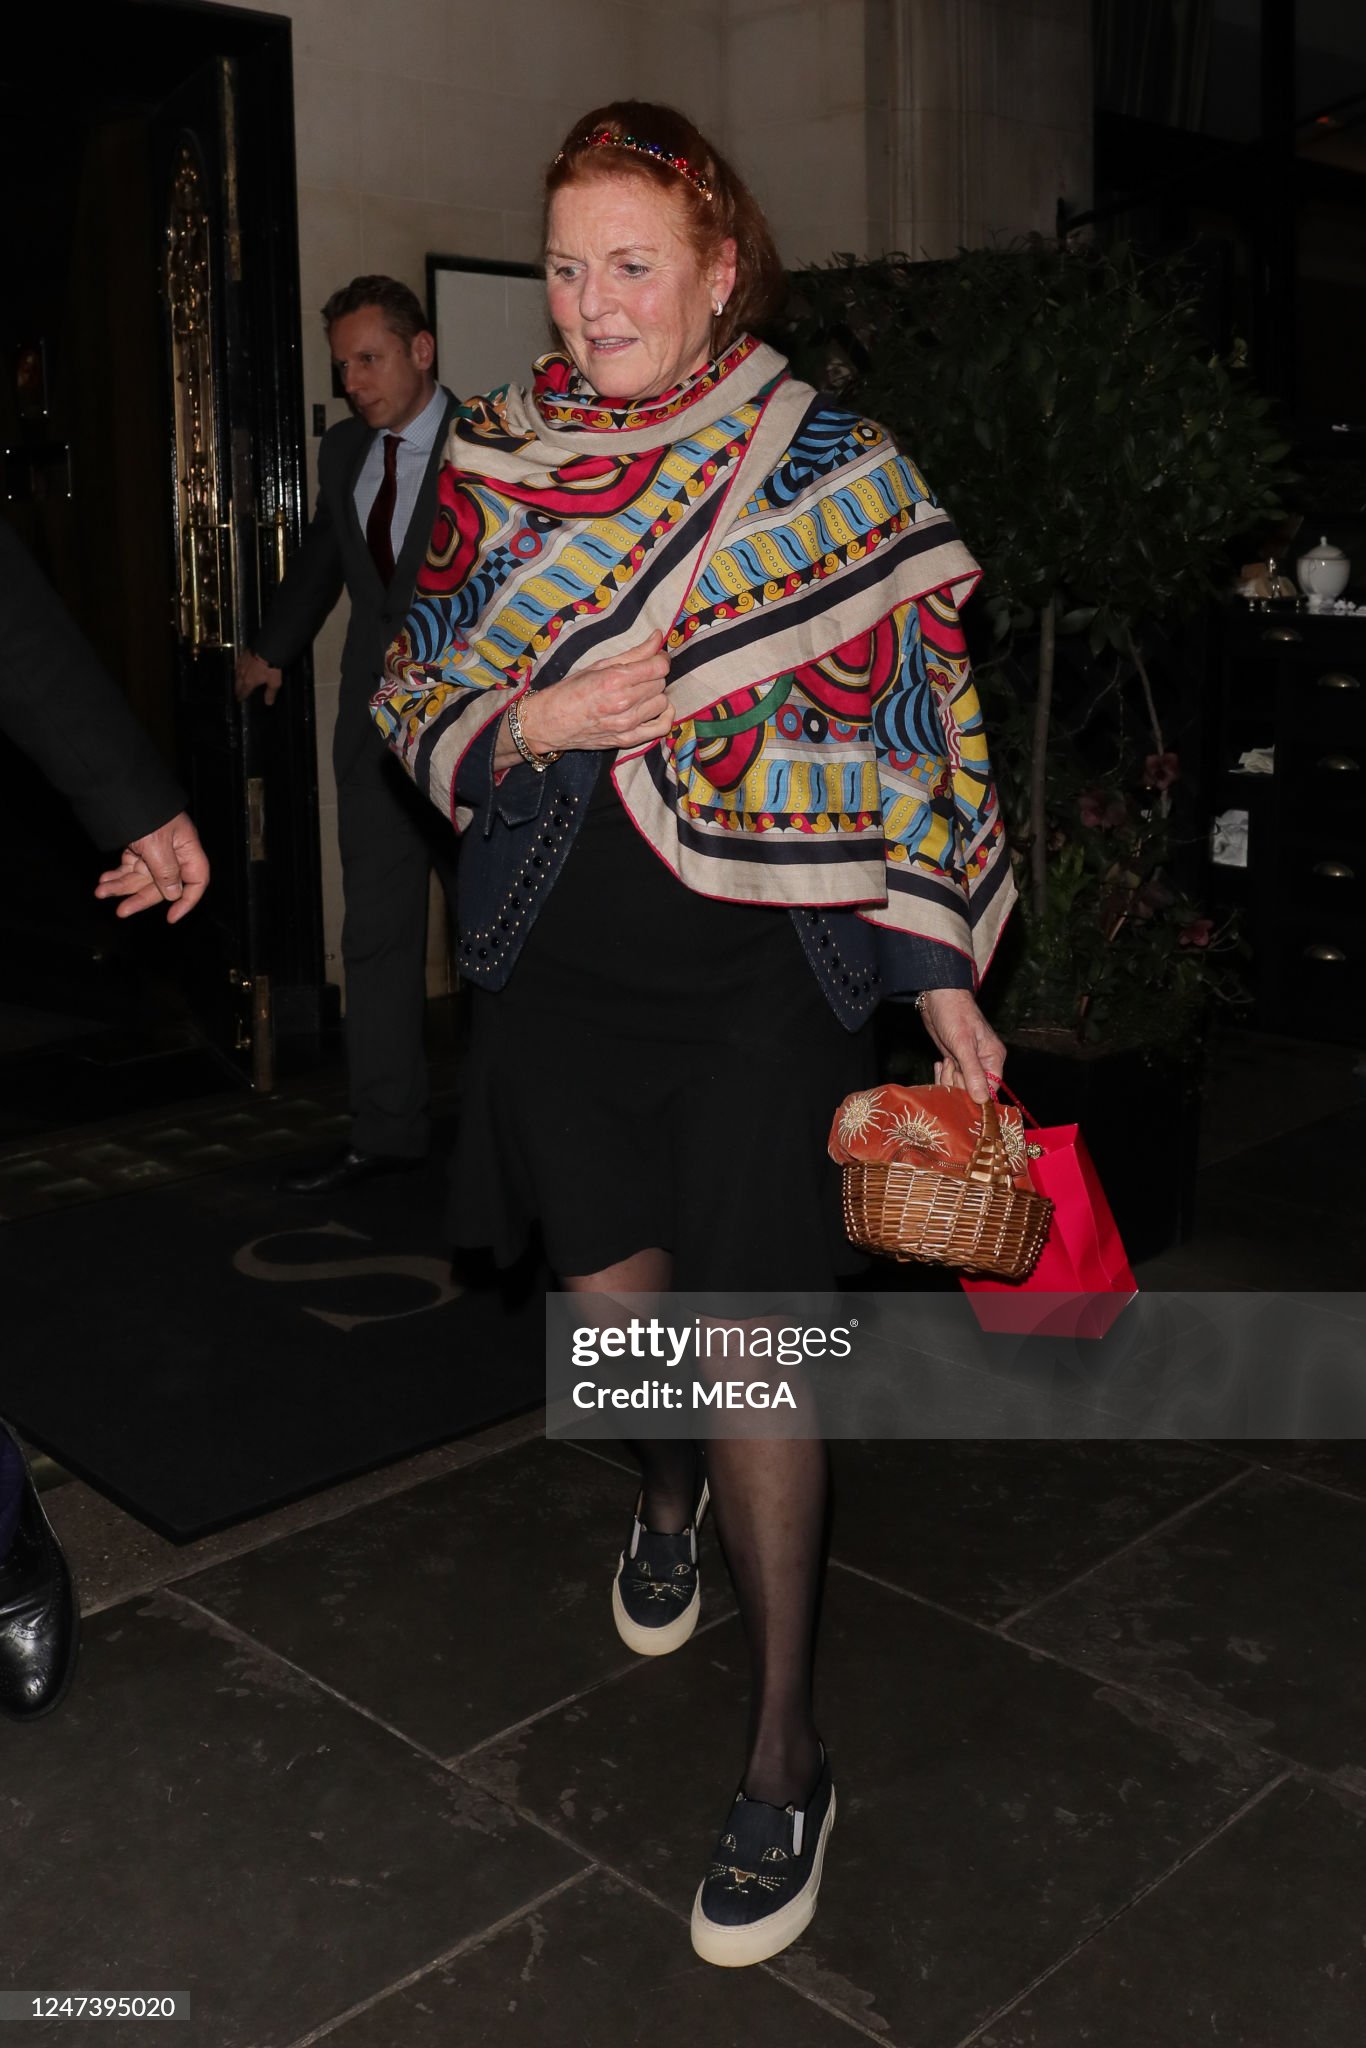 https://media.gettyimages.com/id/1247395020/photo/celebrity-sightings-in-london-february-22-2023.jpg?s=2048x2048&w=gi&k=20&c=HMmIl7pCMB6FopWLb3fPpuDthVH3v4To02yMQepbMws=